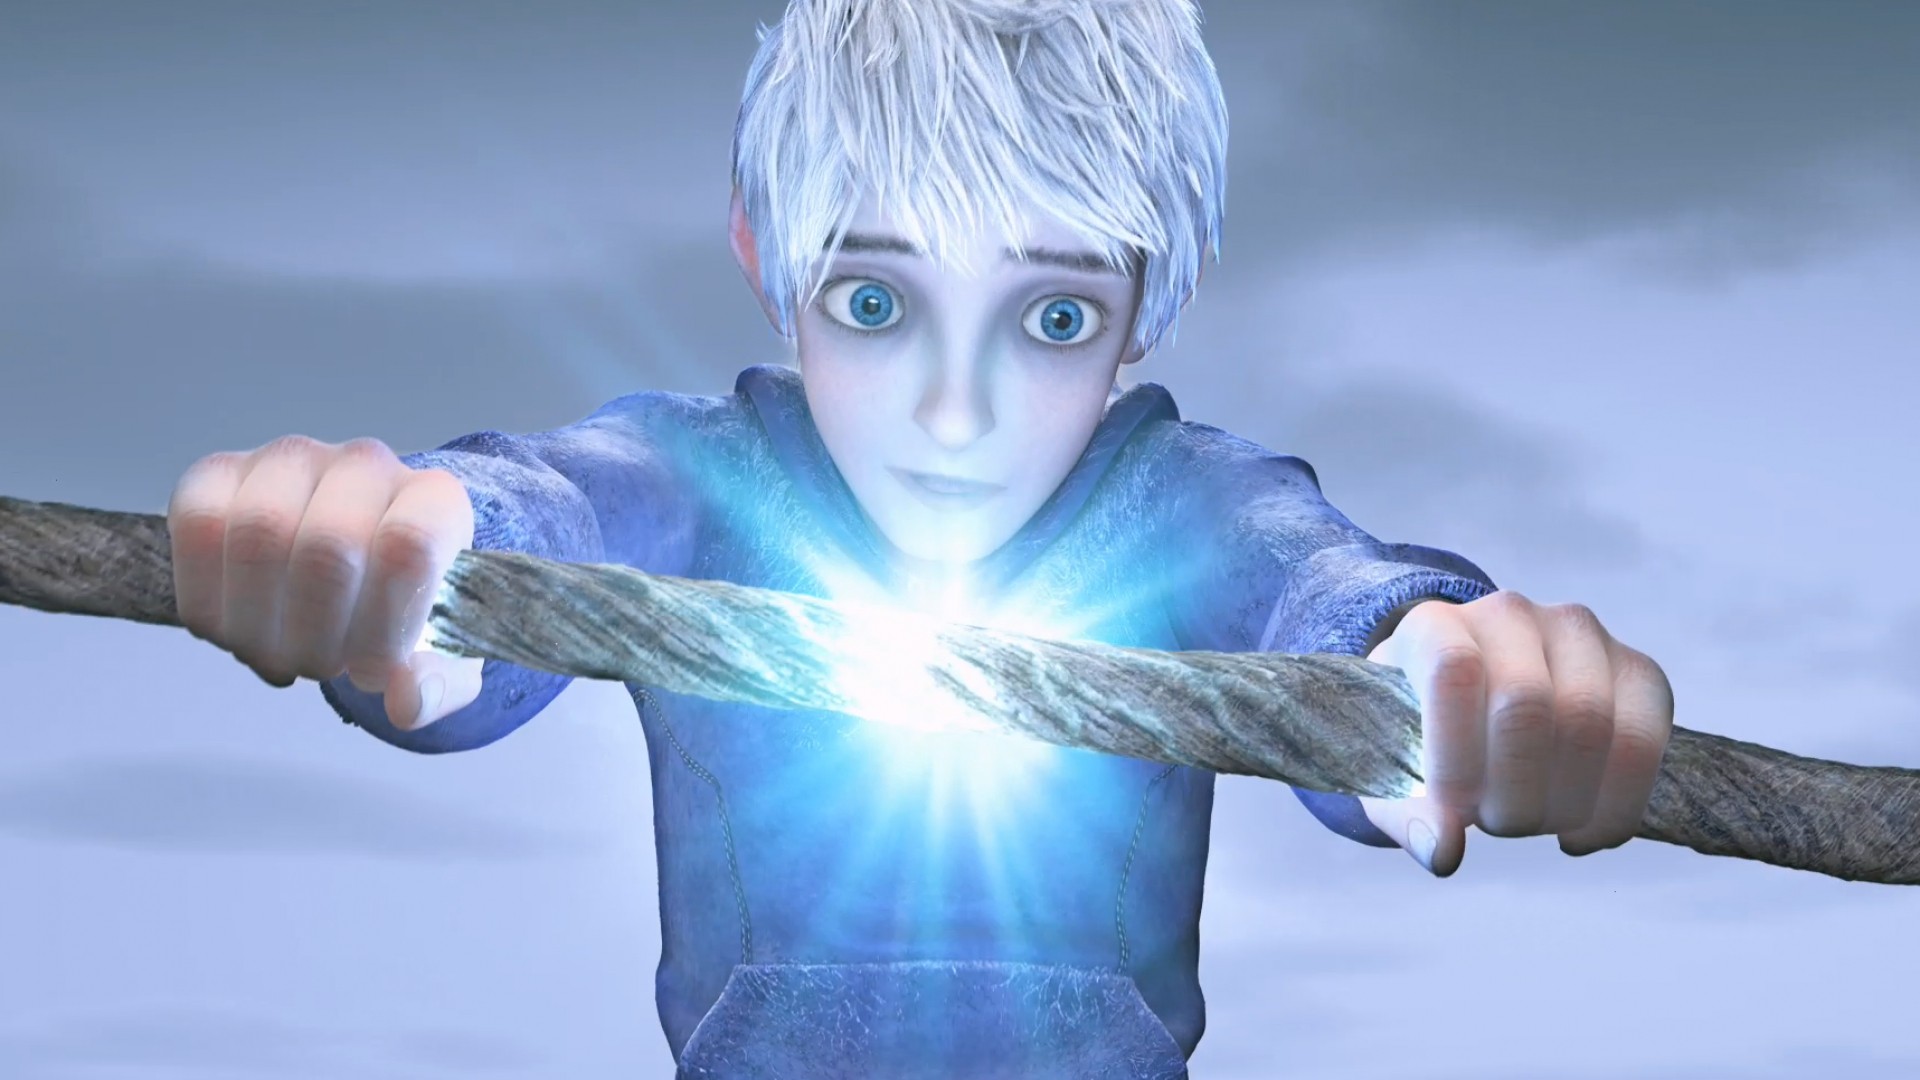 Jack Frost - Rise of the Guardians Wallpaper: Jack Frost.